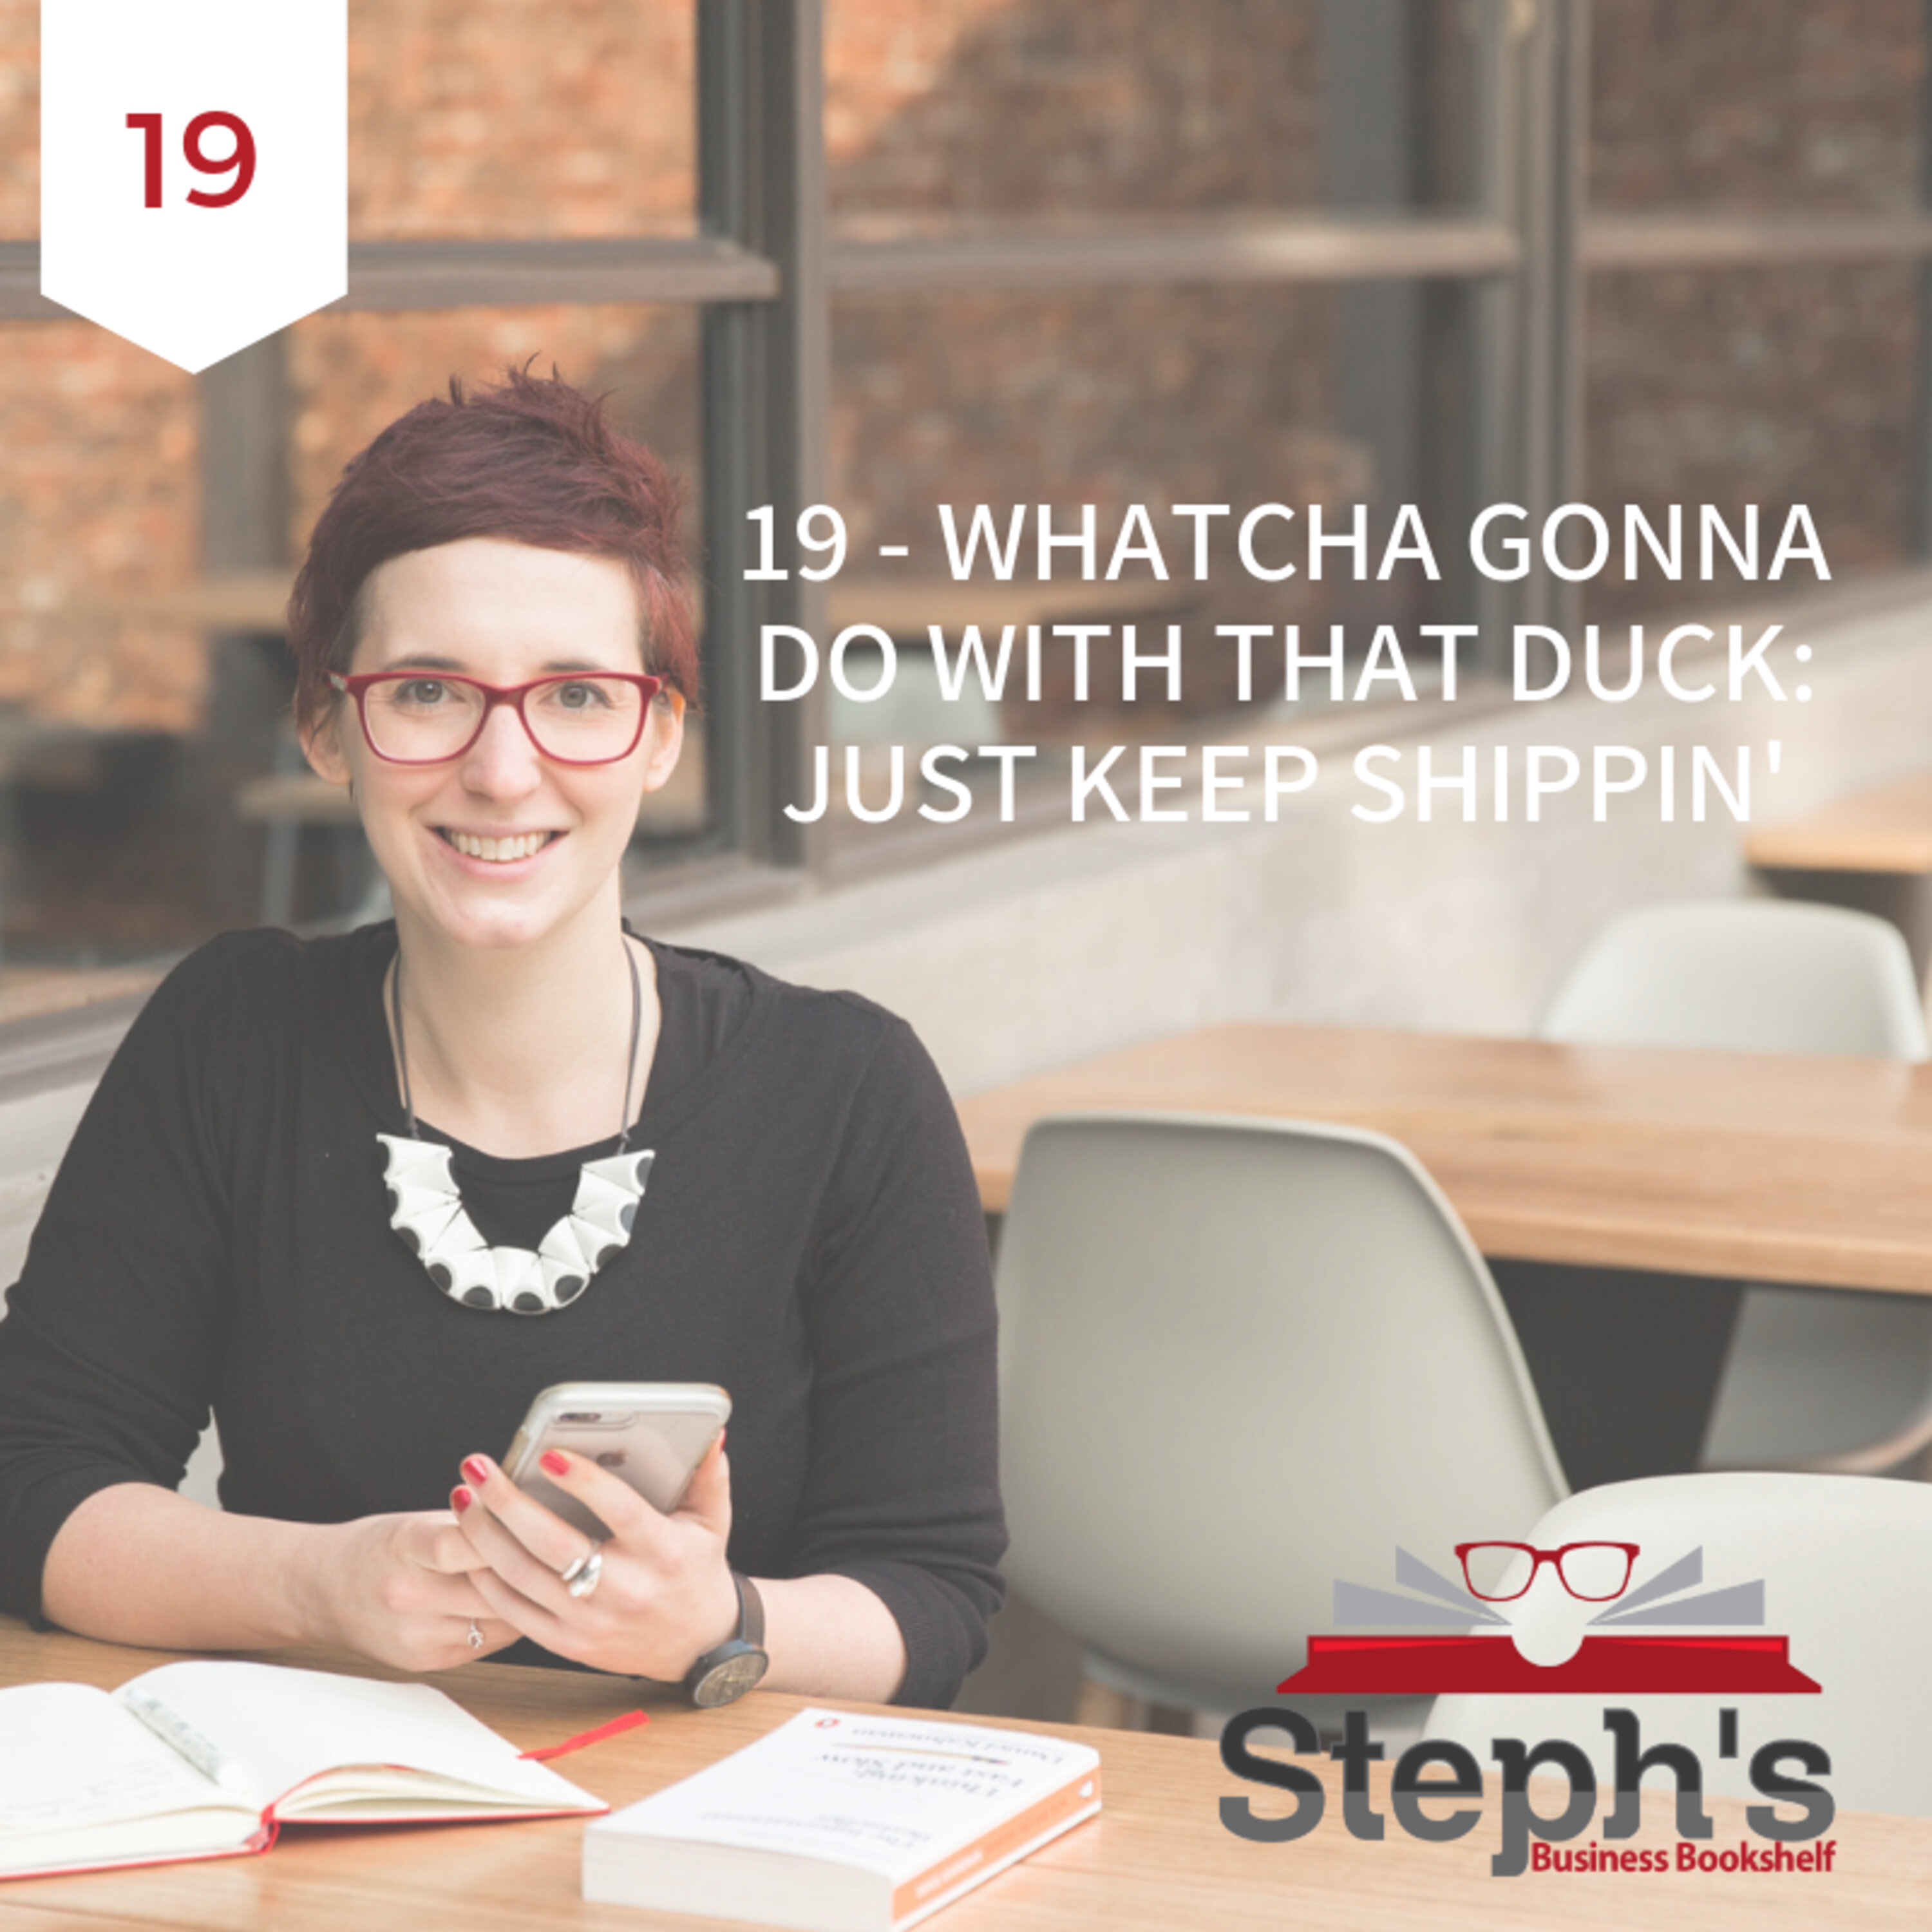 Whatcha Gonna Do With That Duck by Seth Godin: Just keep shippin’